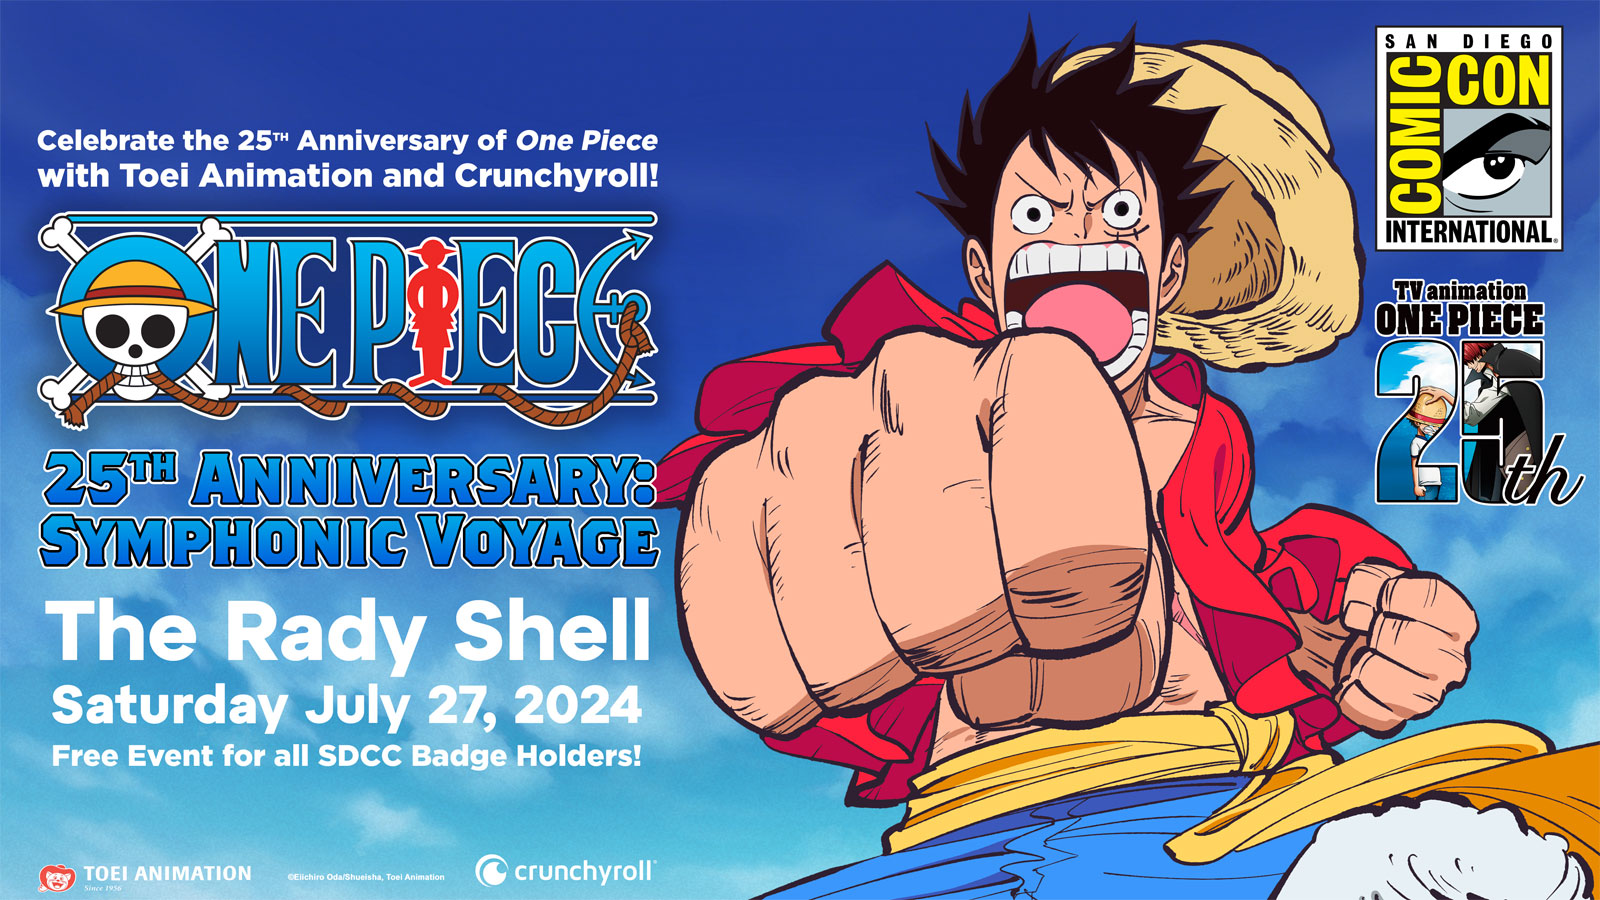 CELEBRATE THE 25th ANNIVERSARY OF ONE PIECE AT THE SYMPHONIC VOYAGE CONCERT DURING SAN DIEGO COMIC-CON 2024 *NEW POST*